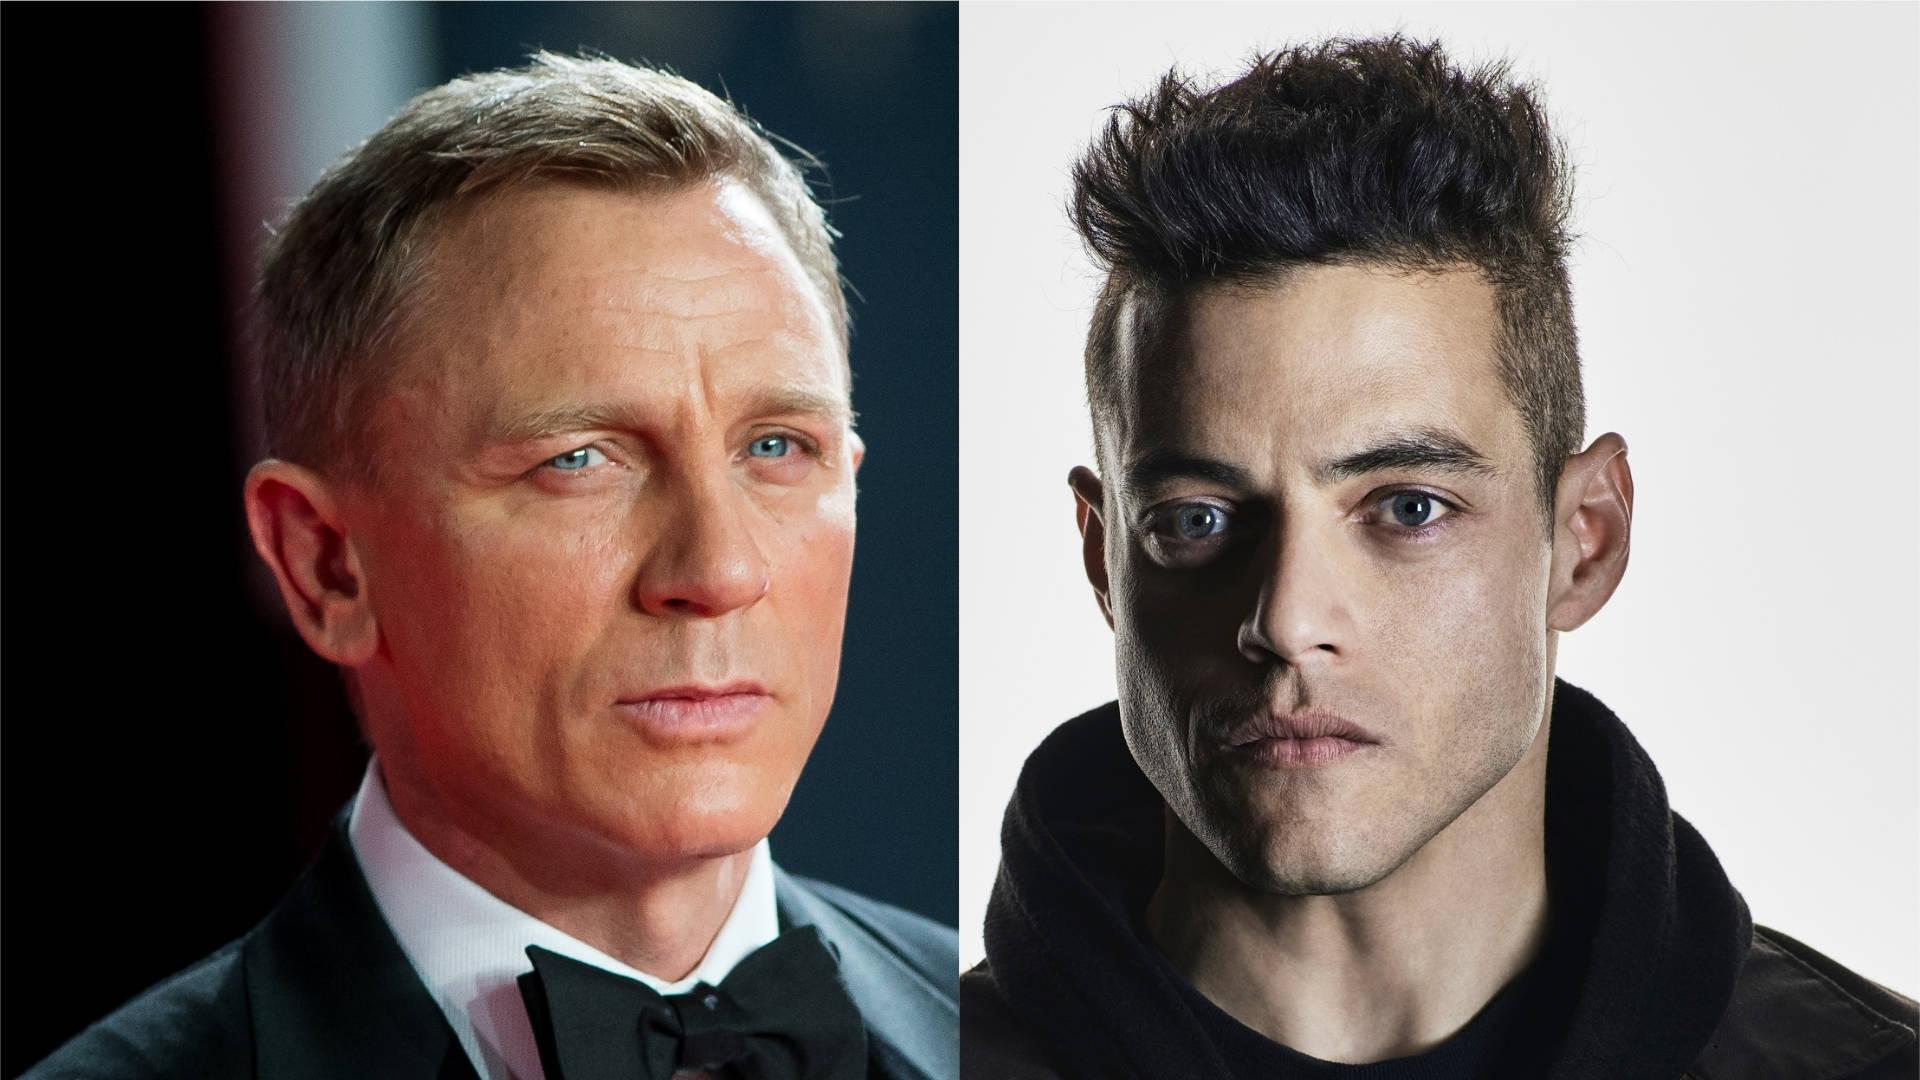 James Bond 25: No Time To Die release date, cast, trailer